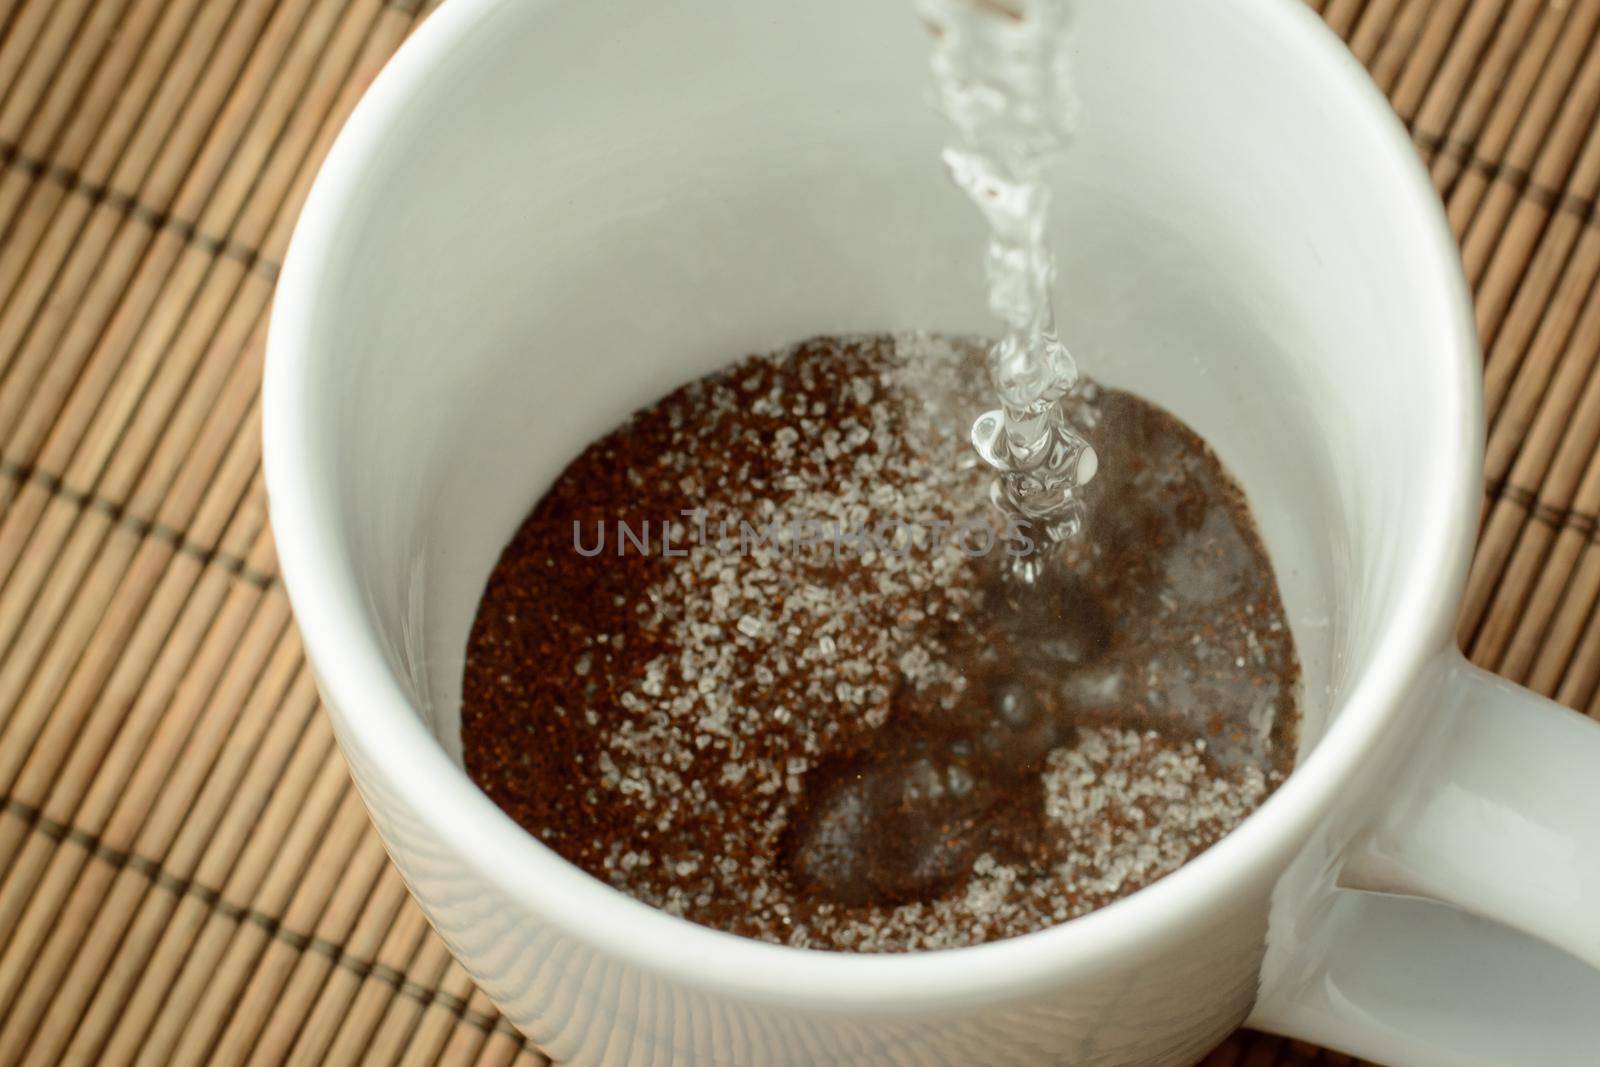 Pouring boiling water to the cap with coffee and sugar